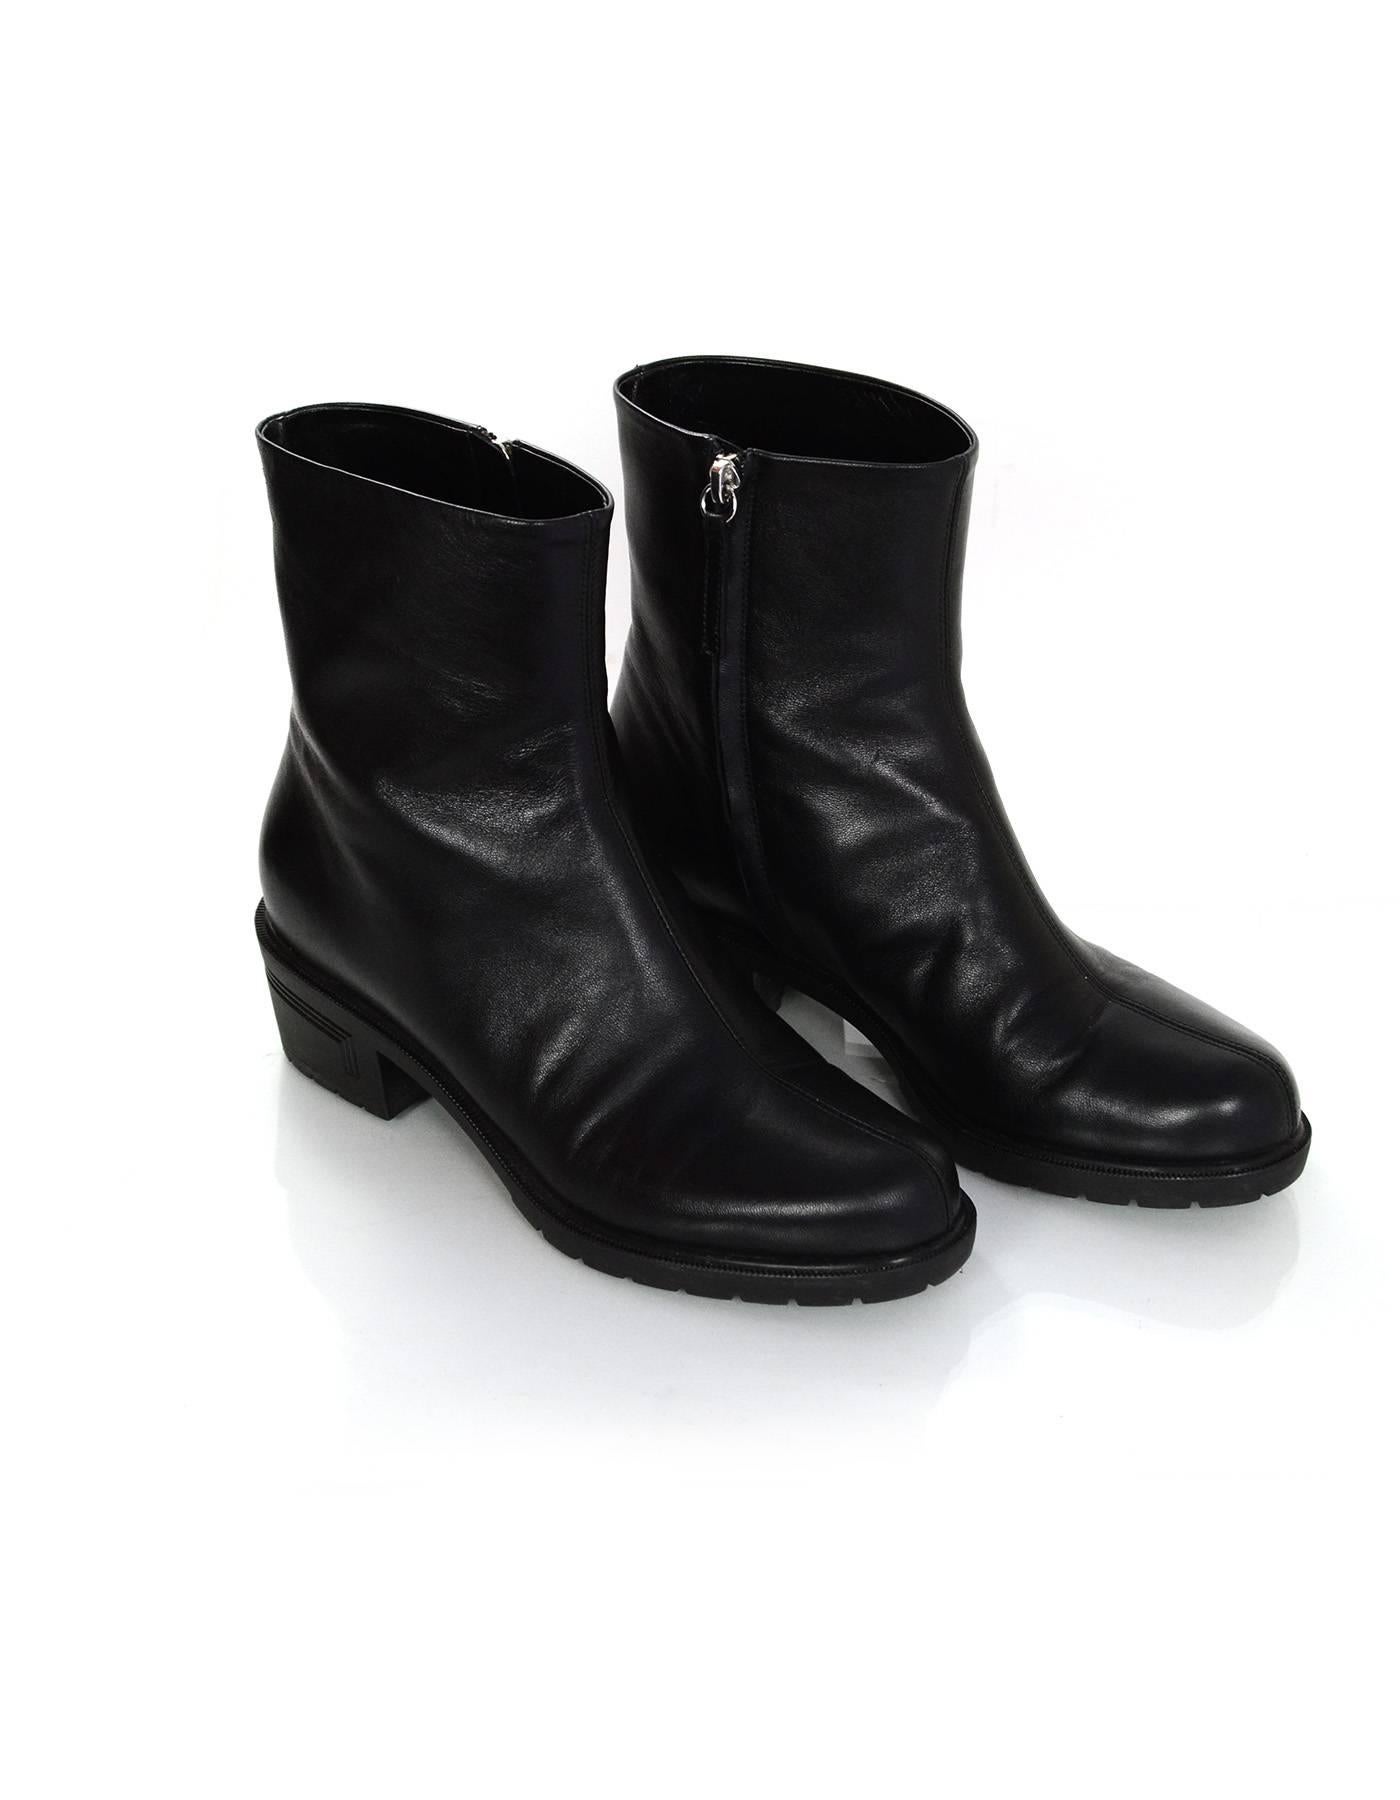 Giuseppe Zanotti Black Leather Ankle Boots Sz 38

Made In: Italy
Color: Black
Materials: Leather
Closure/Opening: Side zip closure
Sole Stamp: Giuseppe Zanotti 38 made in italy
Overall Condition: Excellent pre-owned condition with the exception of